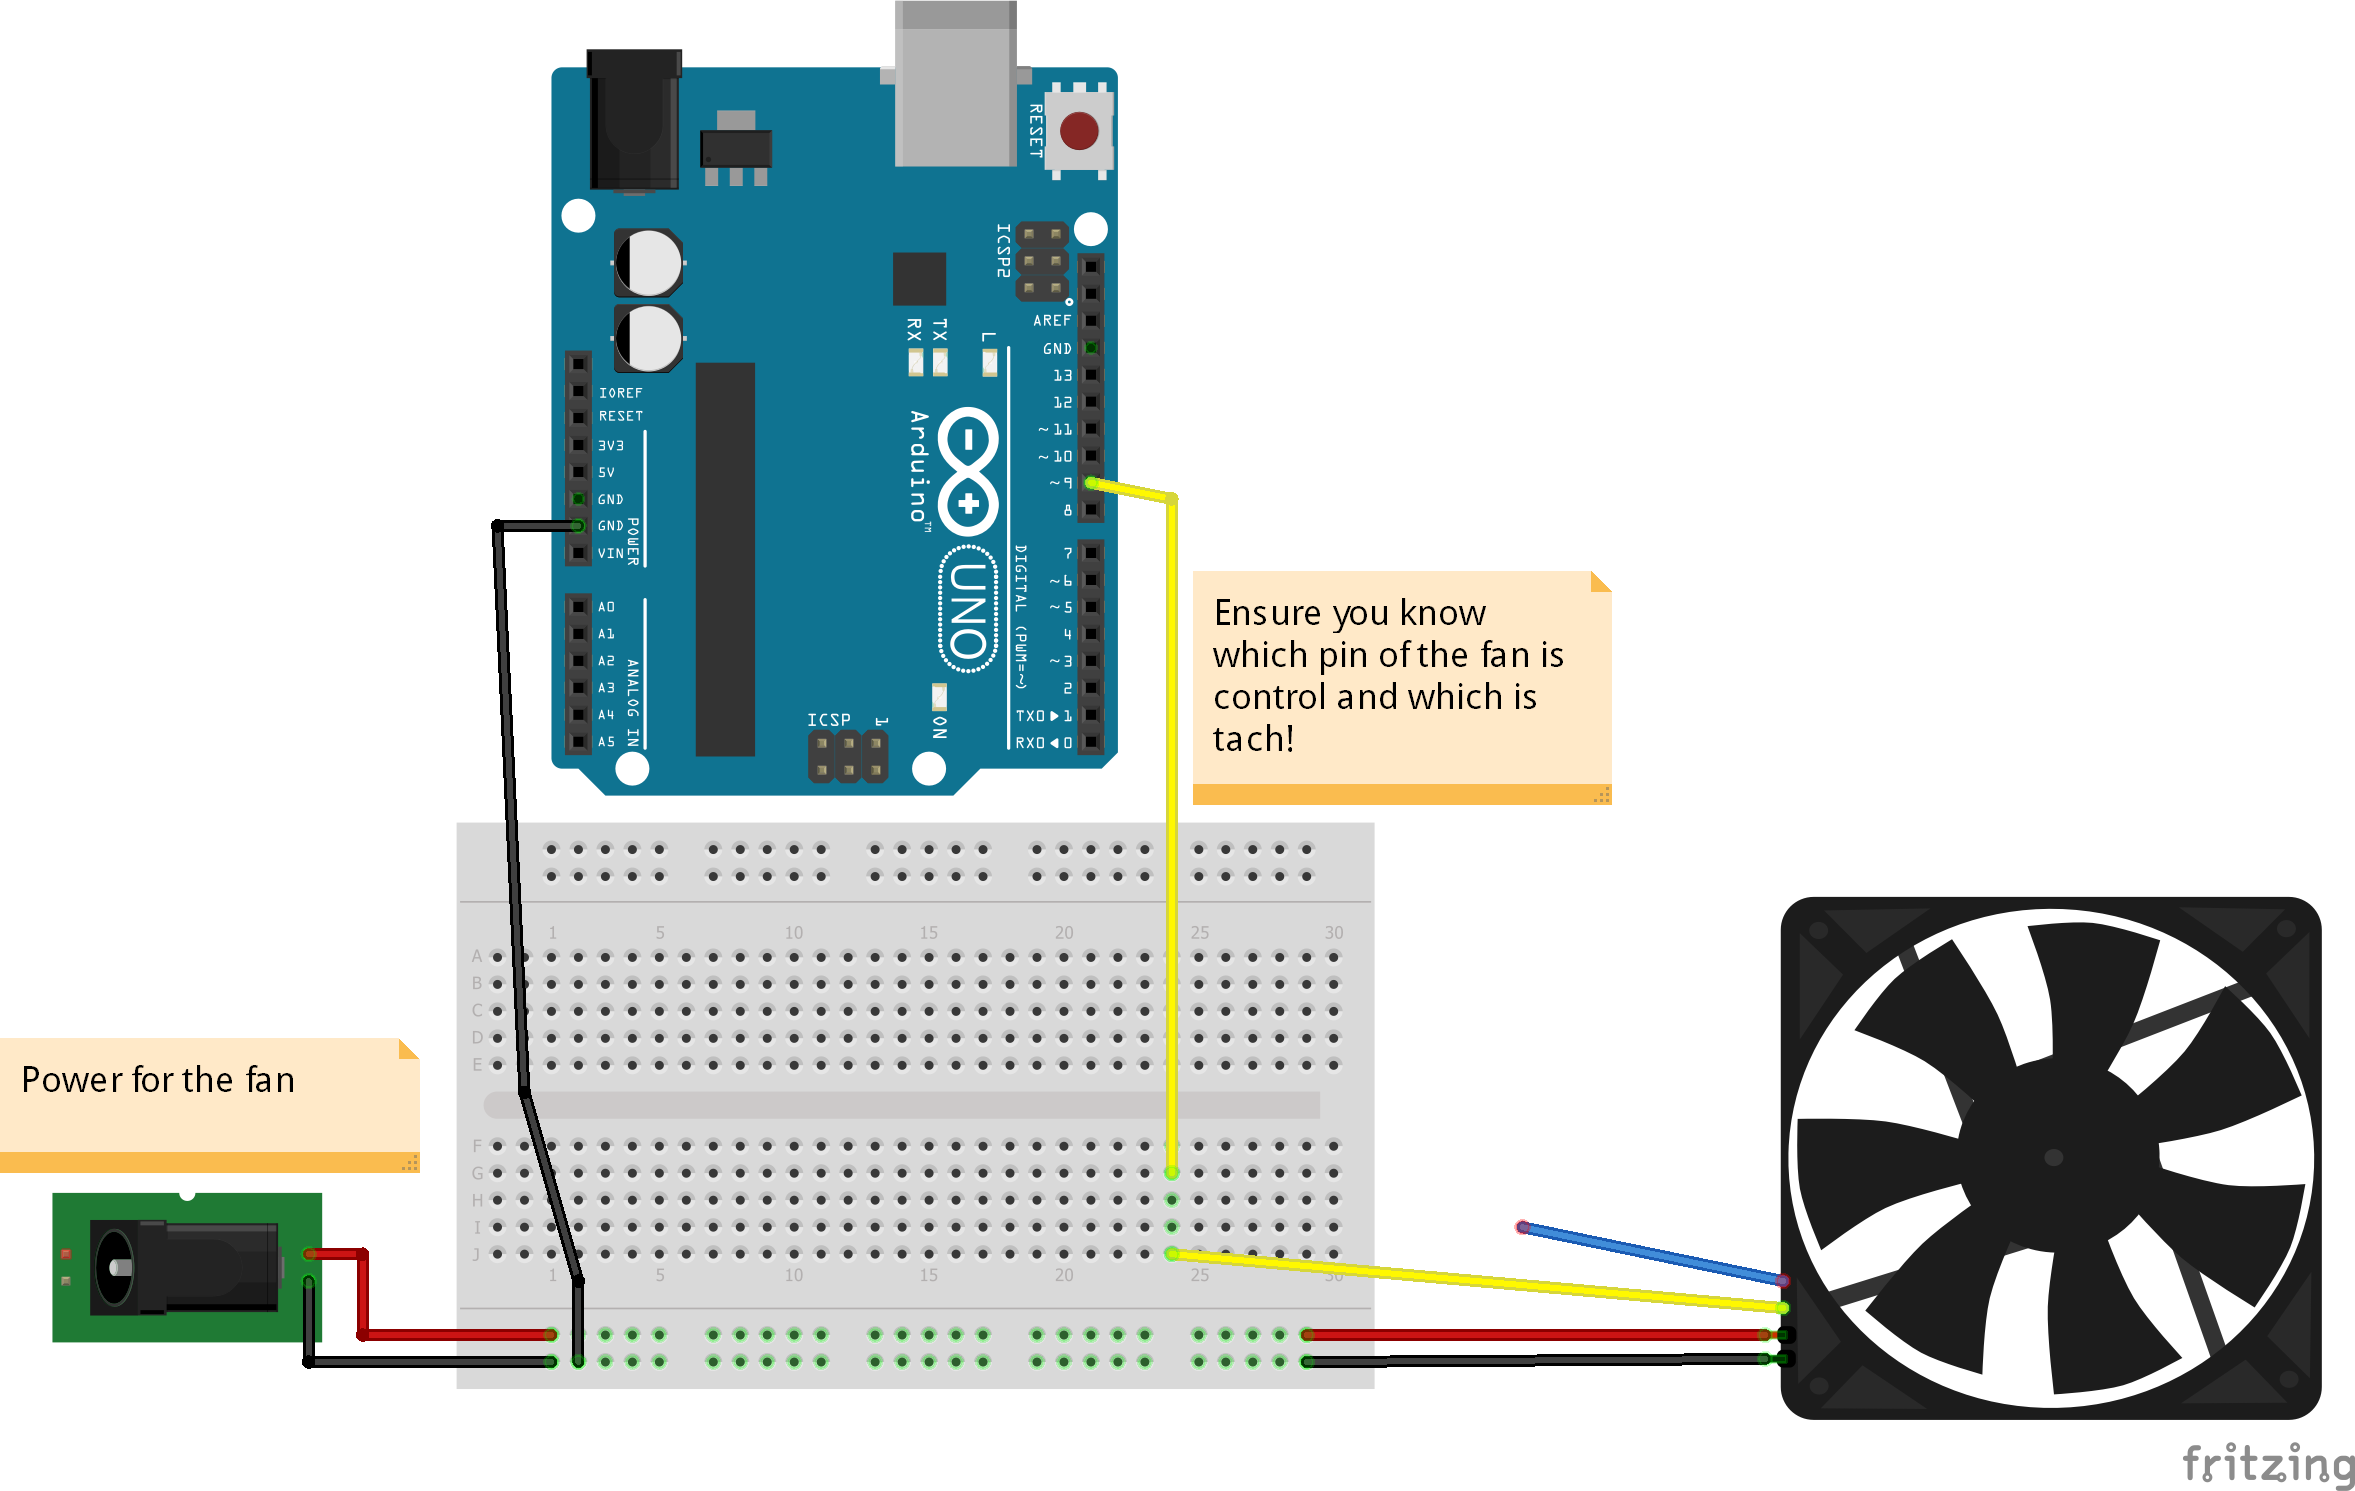 at styre marxistisk Postimpressionisme 25 kHz 4 Pin PWM Fan Control with Arduino Uno - Hackster.io